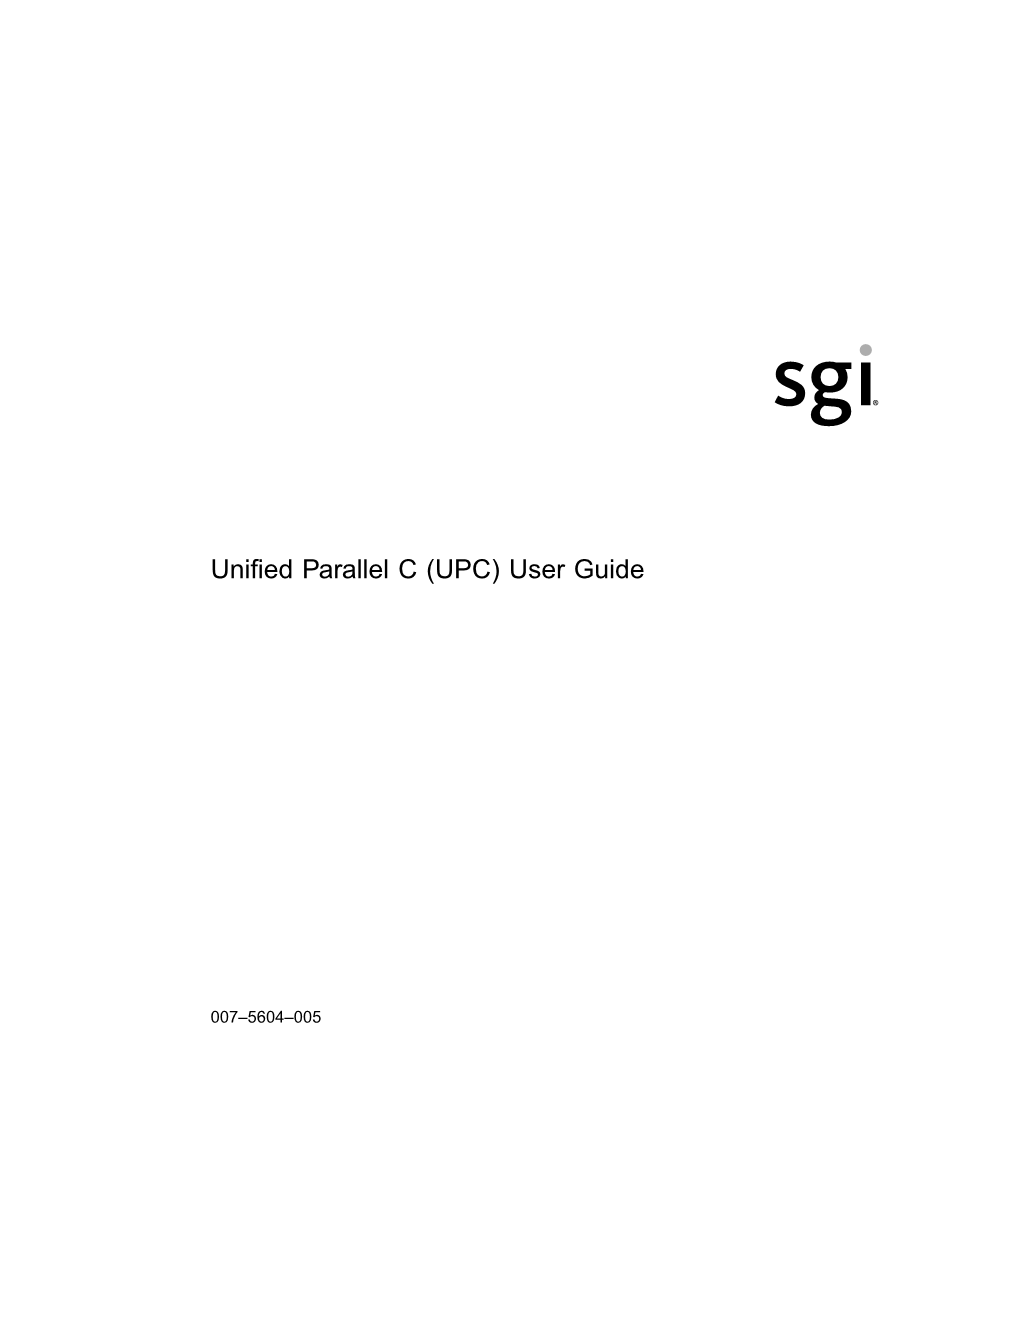 Unified Parallel C (UPC) User Guide